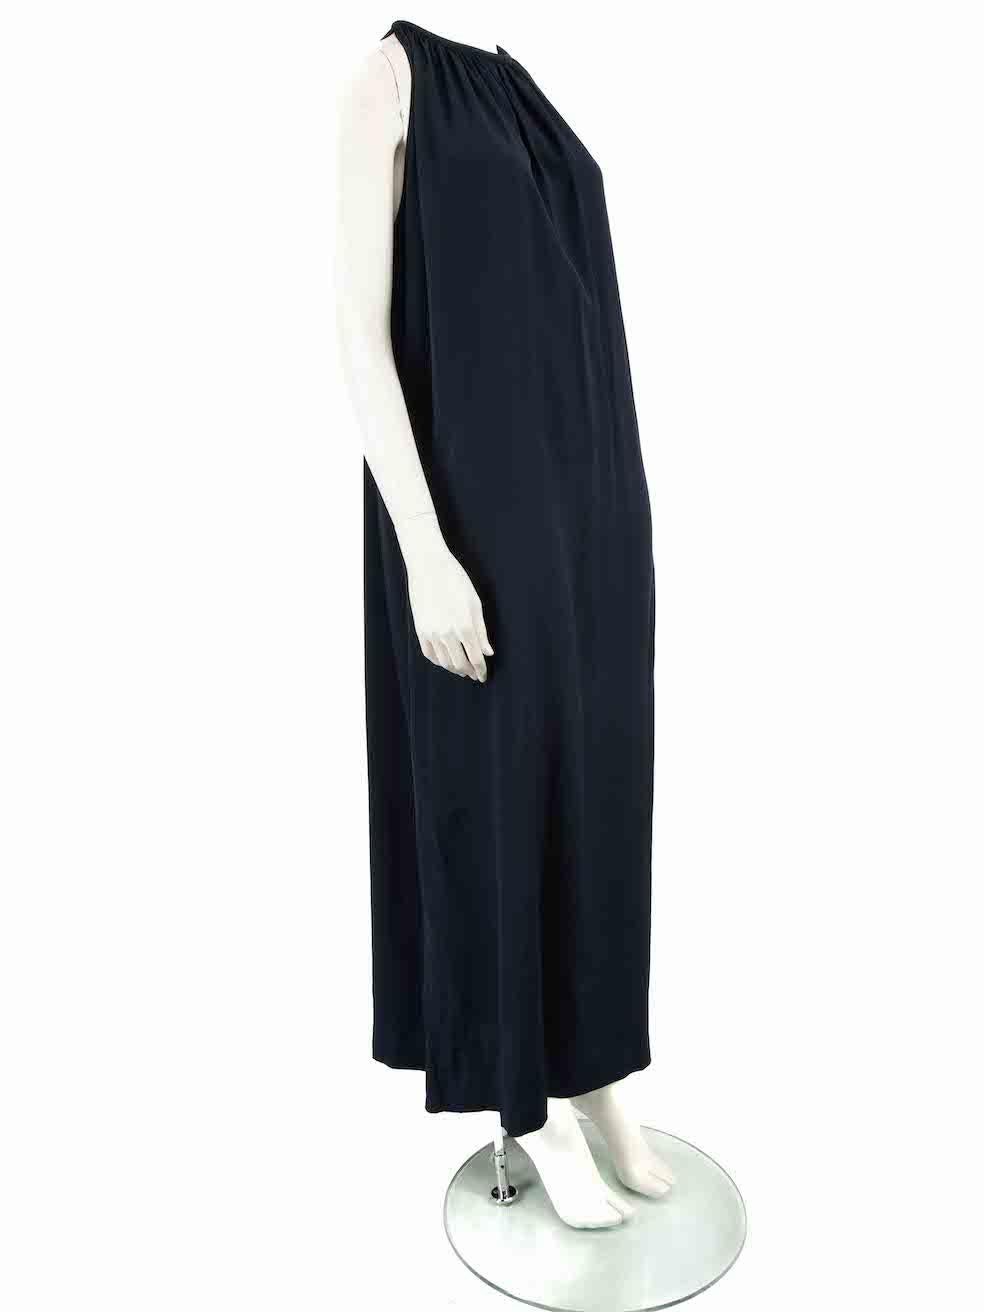 CONDITION is Never worn, with tags. No visible wear to dress is evident on this new Bella Freud designer resale item.
 
 
 
 Details
 
 
 Navy
 
 Silk
 
 Maxi gown
 
 Round neckline
 
 Sleeveless
 
 2x Front side pockets
 
 Back button closure
 
 
